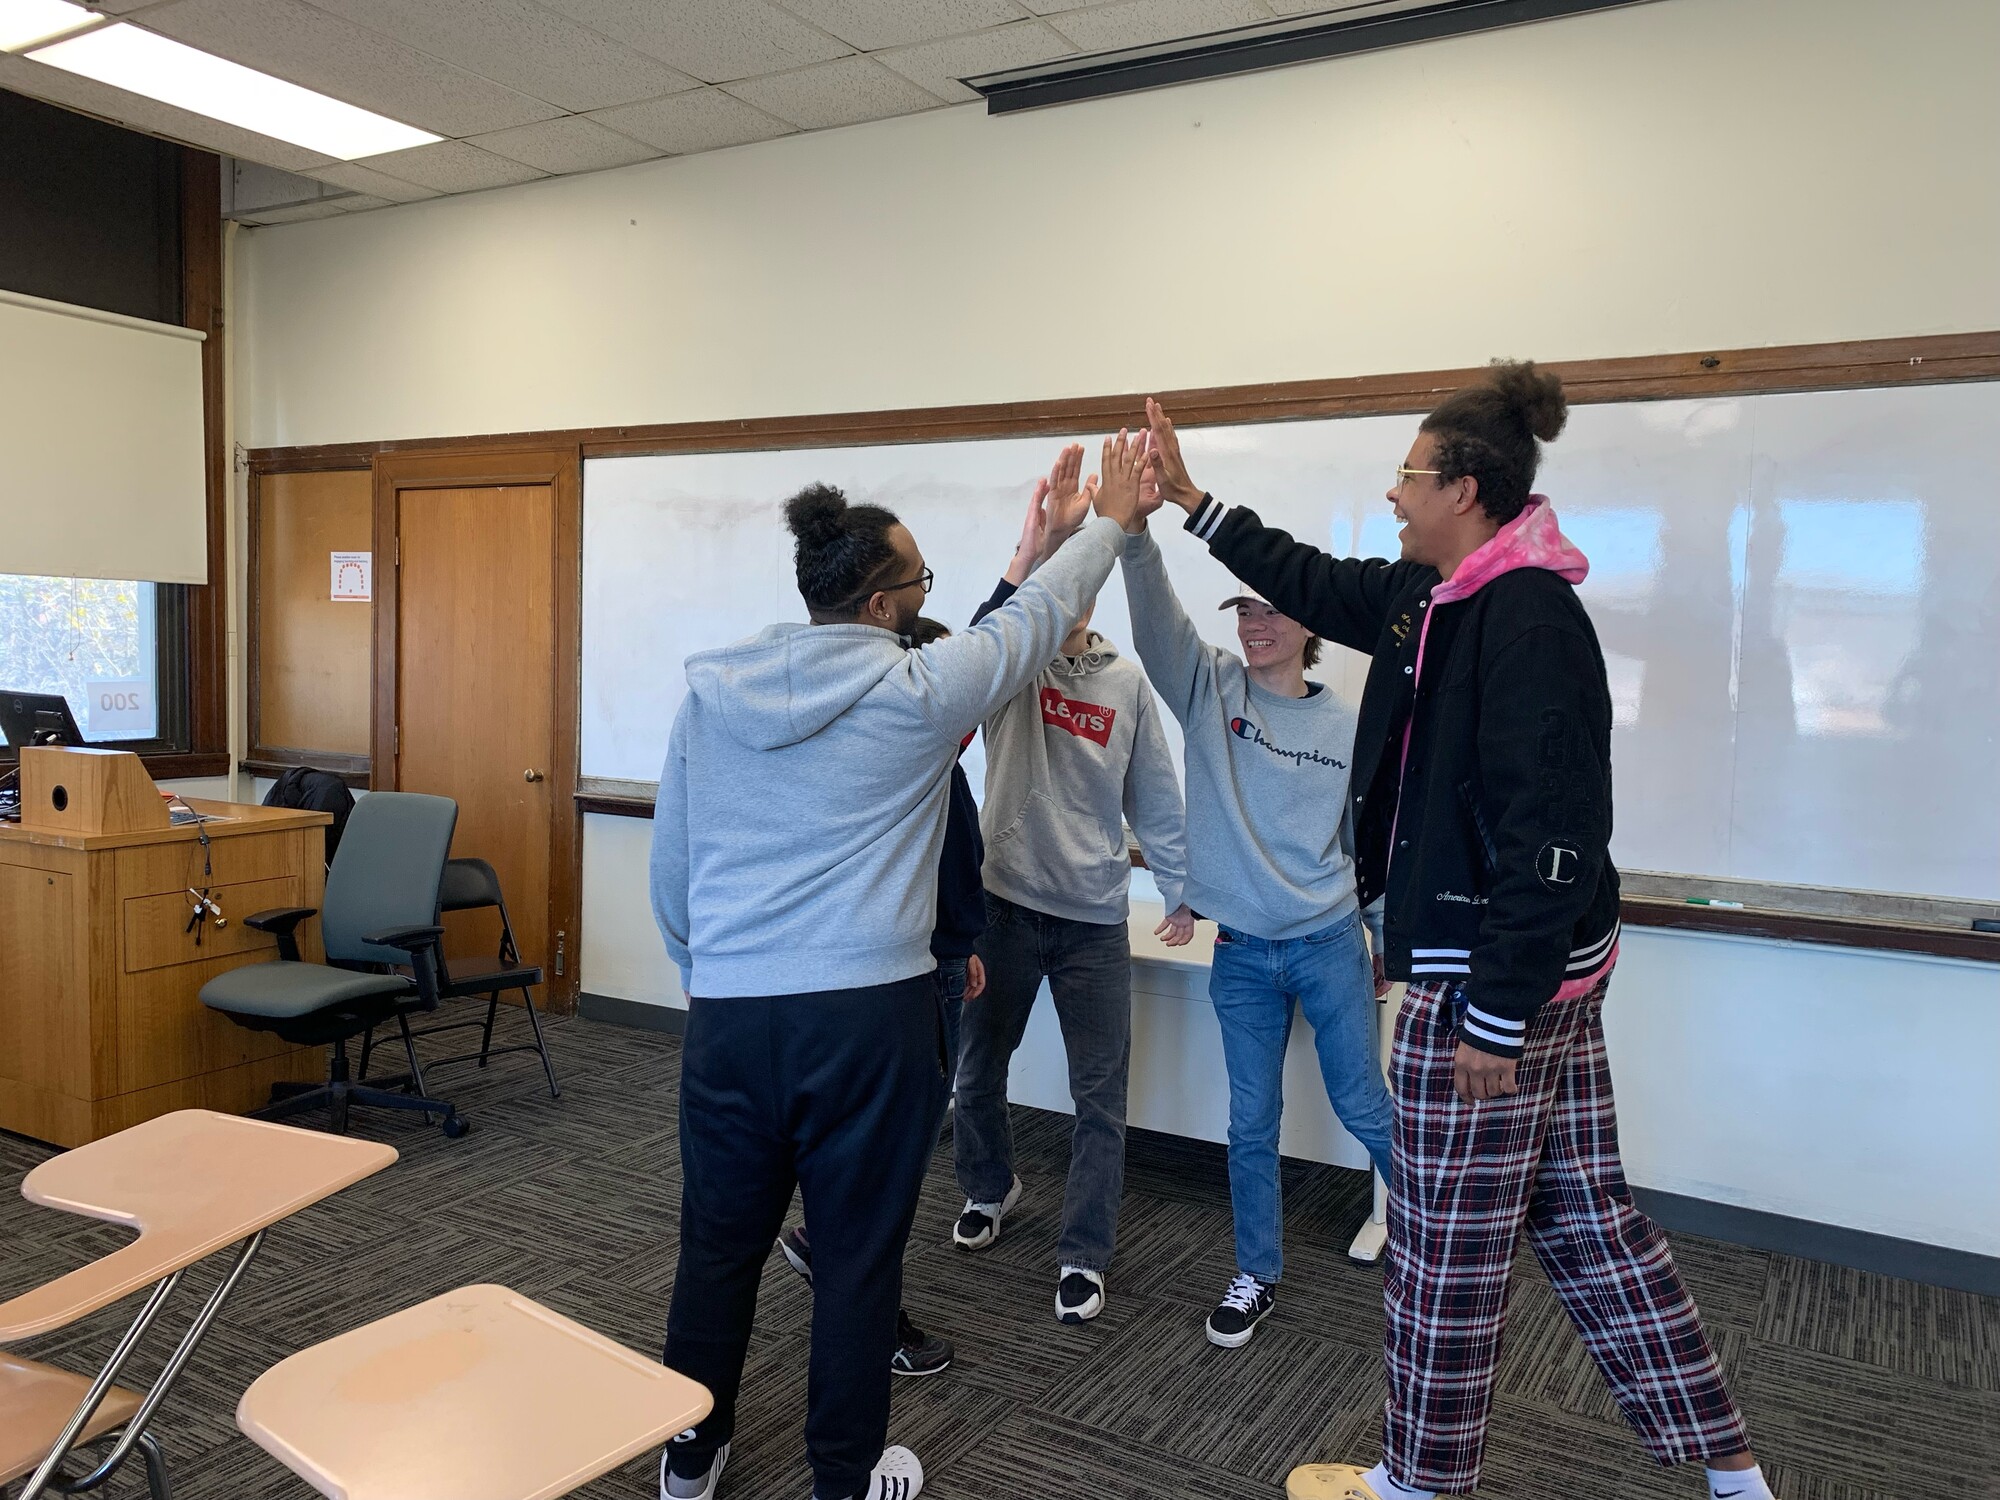 Five people gather in a circle and high five in the center in a classroom.